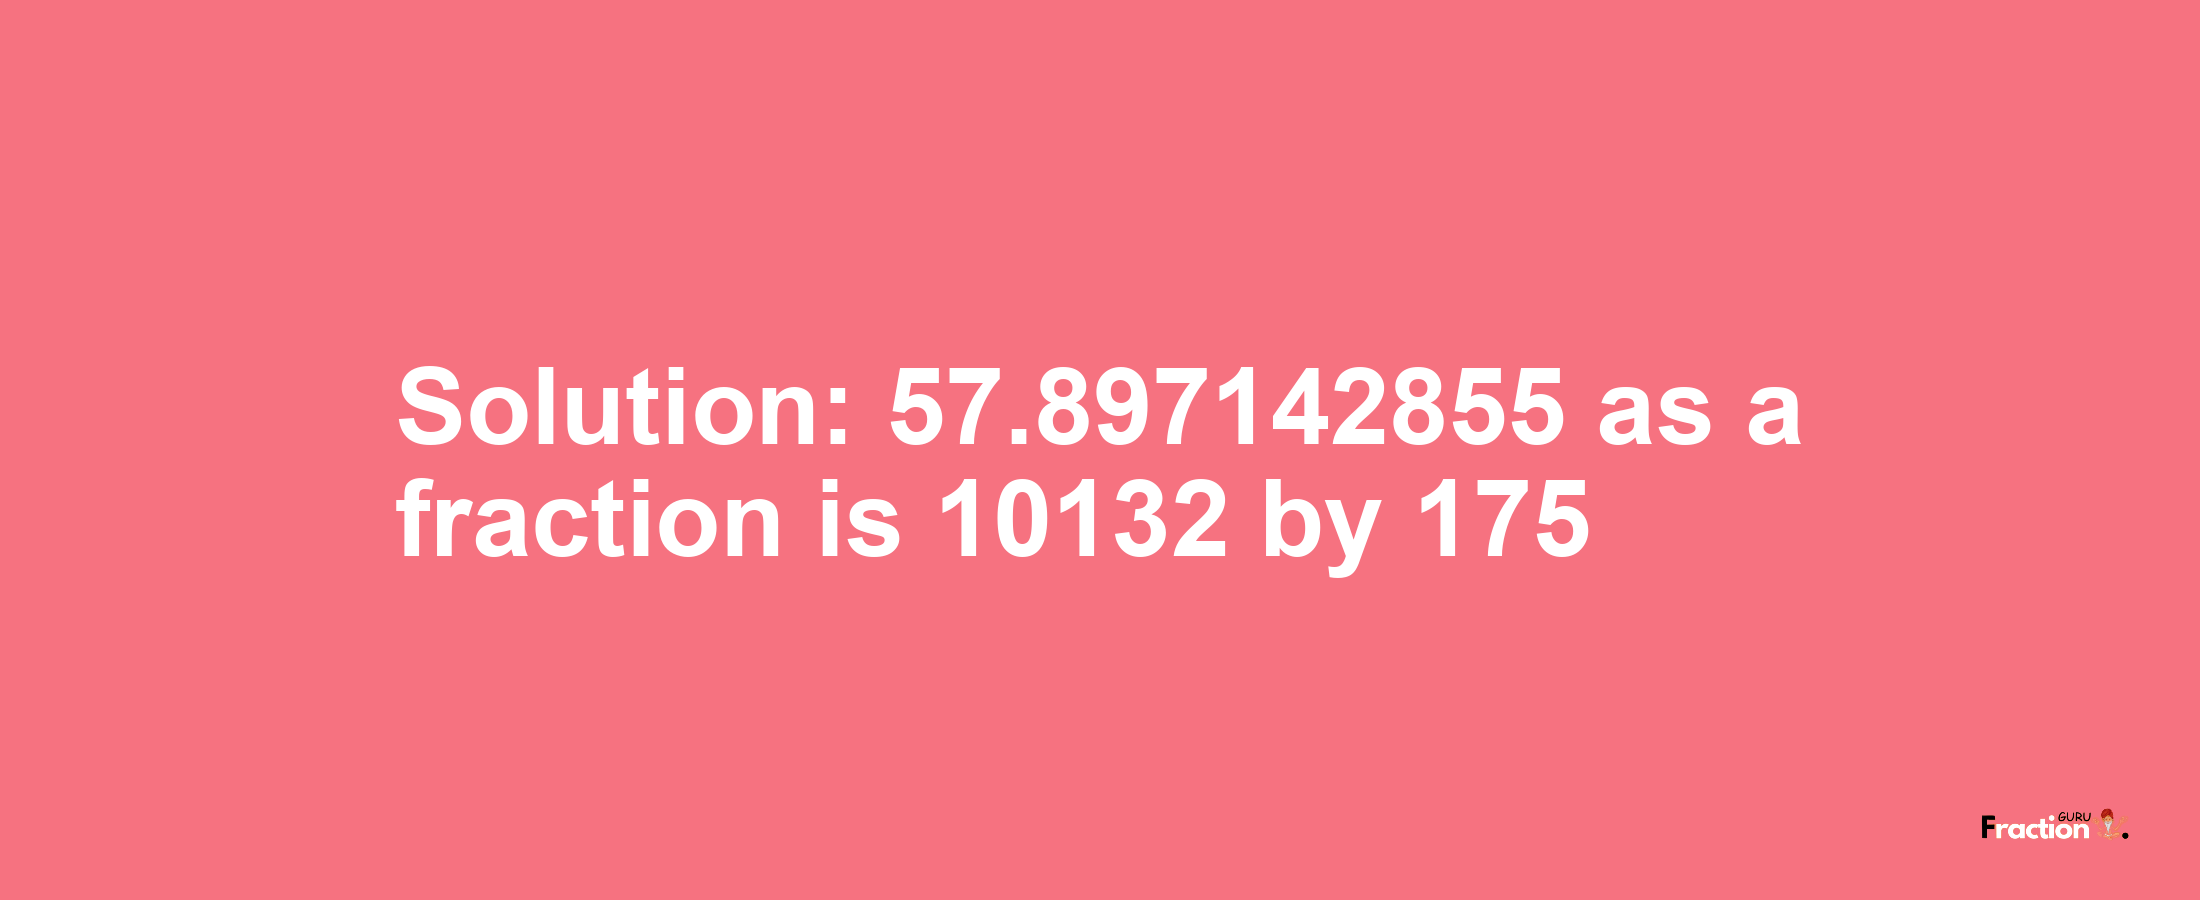 Solution:57.897142855 as a fraction is 10132/175